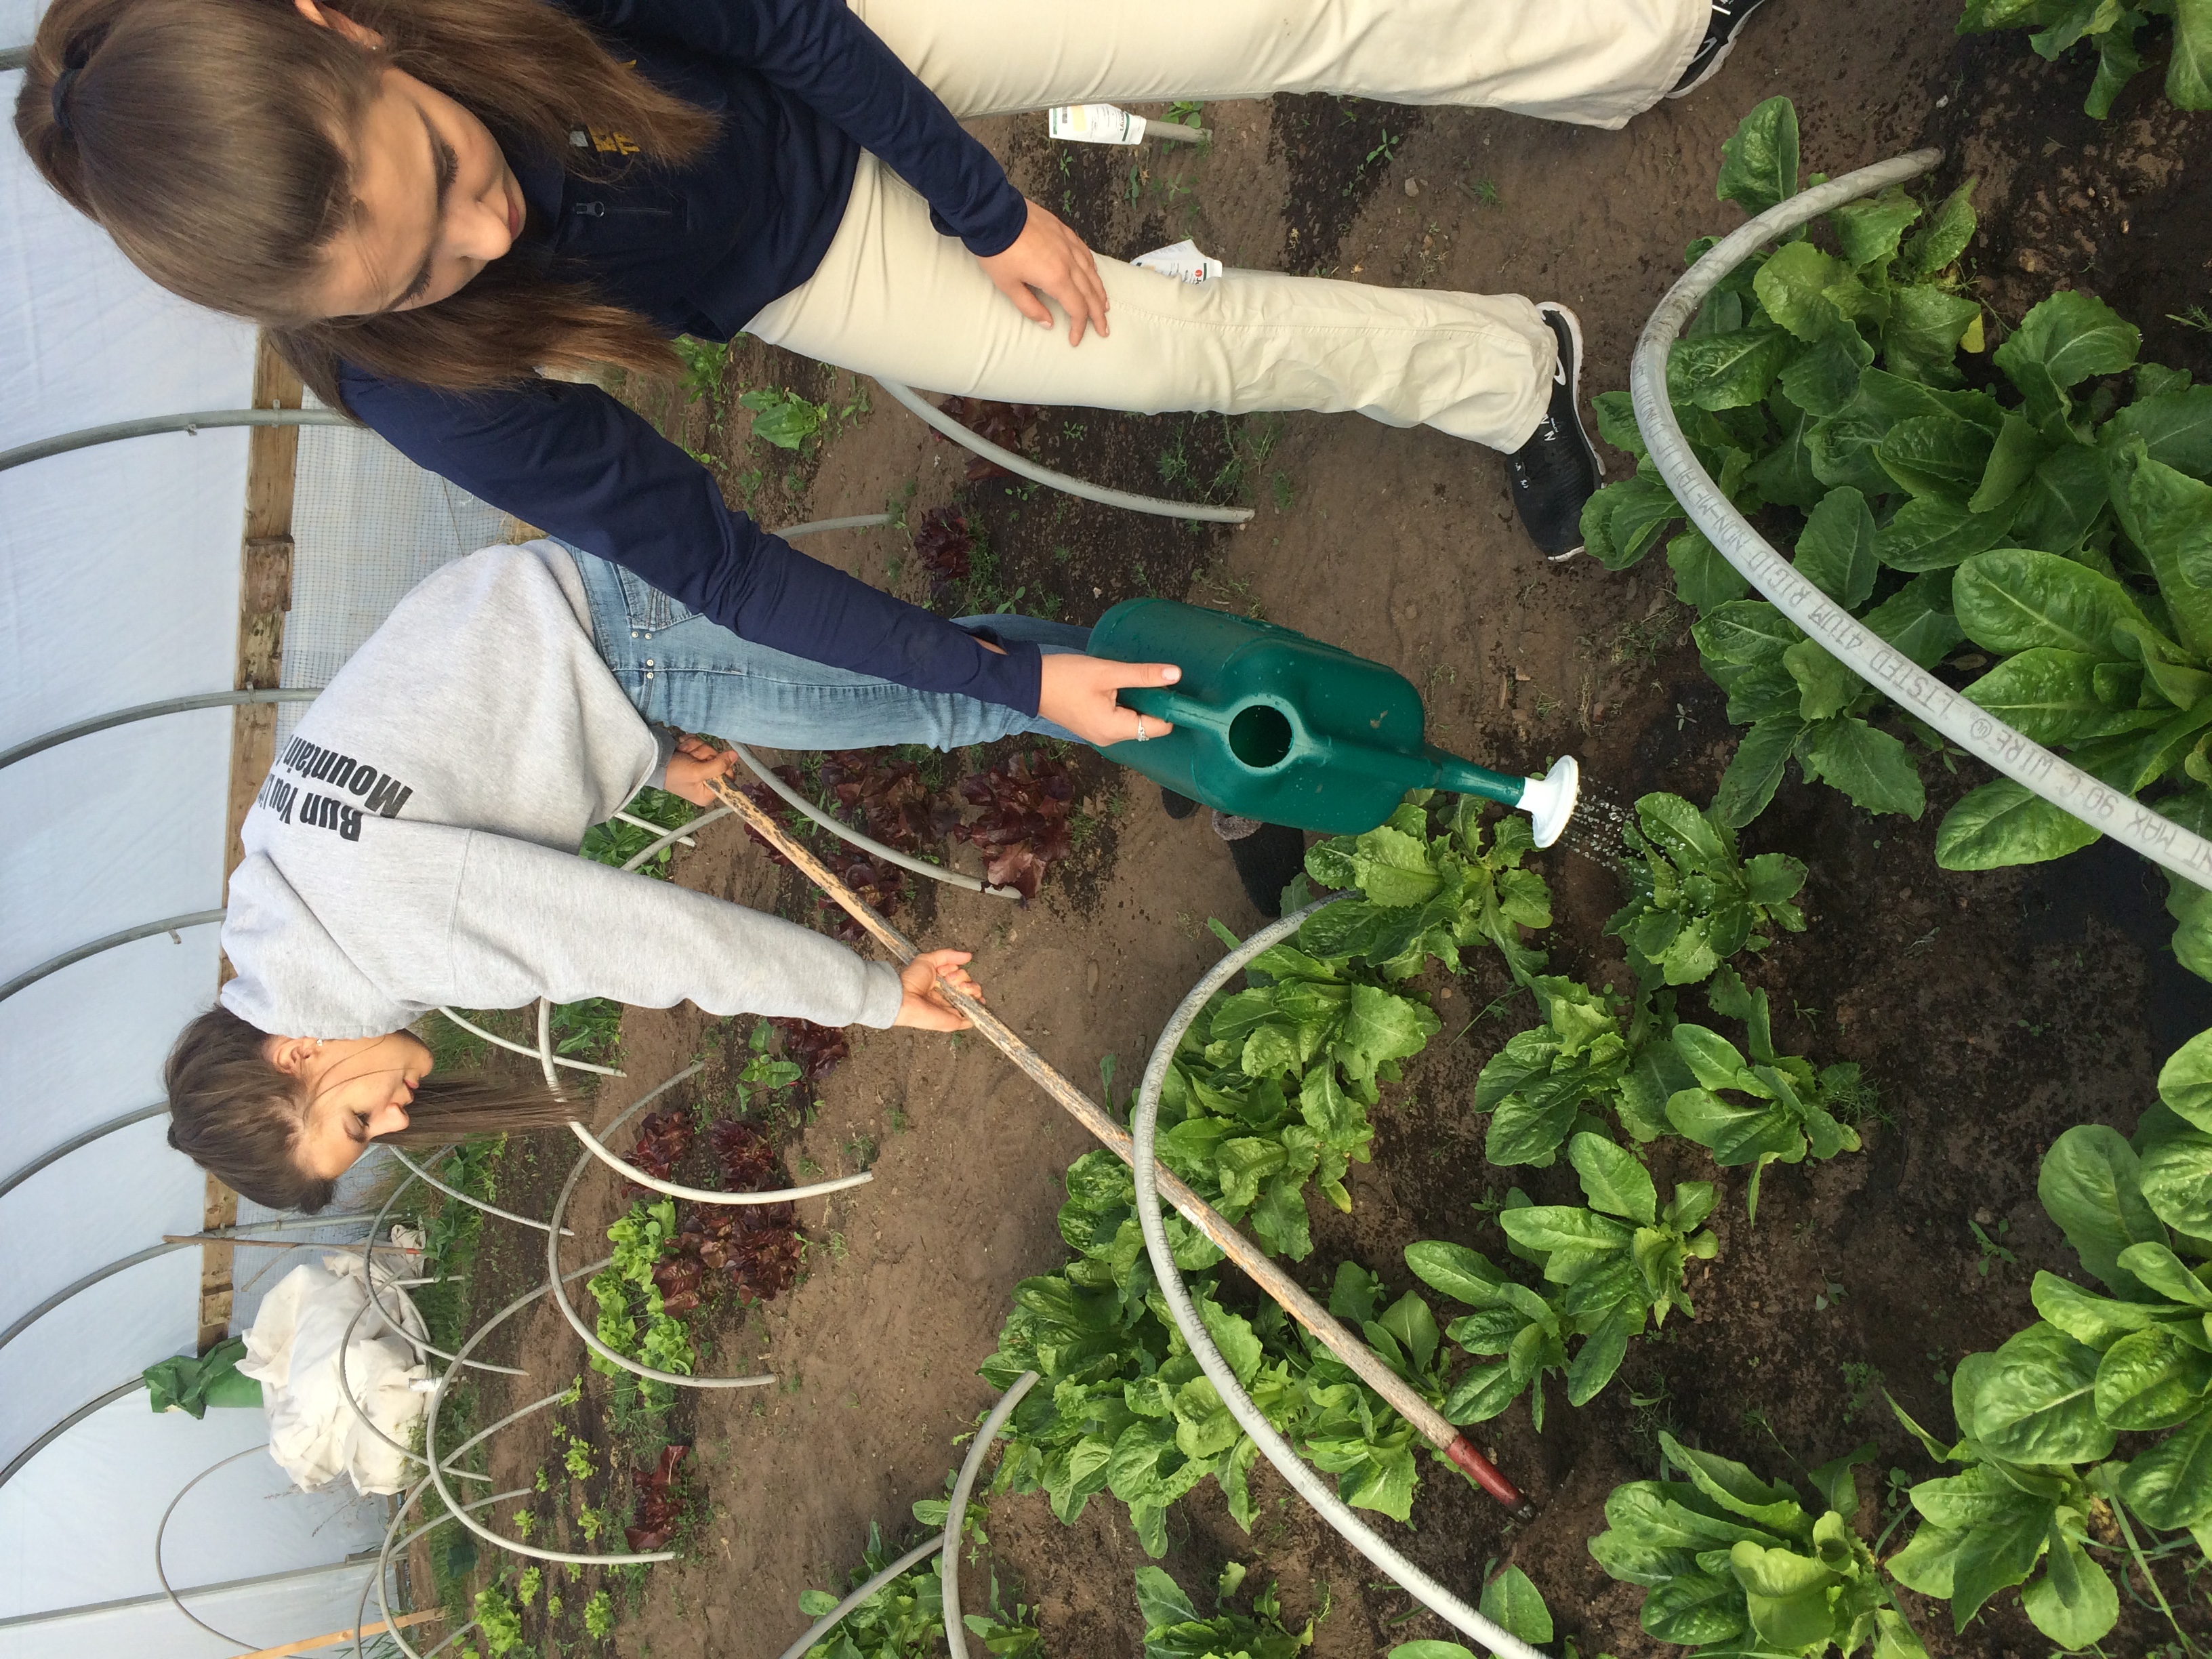 Two students care for plants in a hoop house.